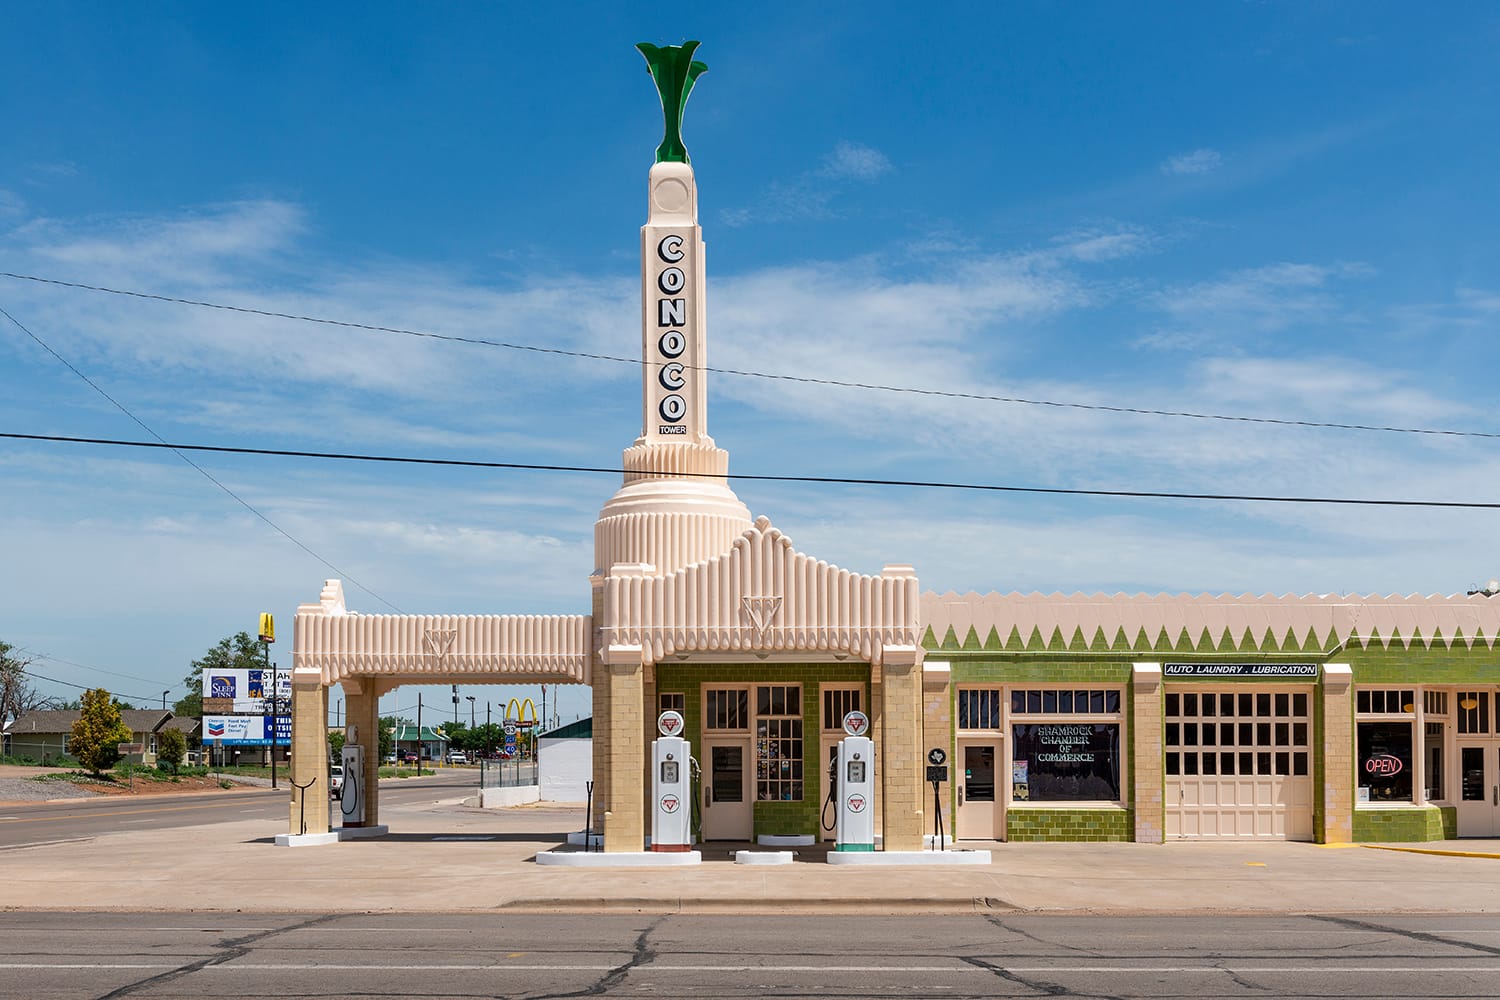 The beautiful art deco building od the U-Drop Inn Gas Station, along the historic route 66, USA